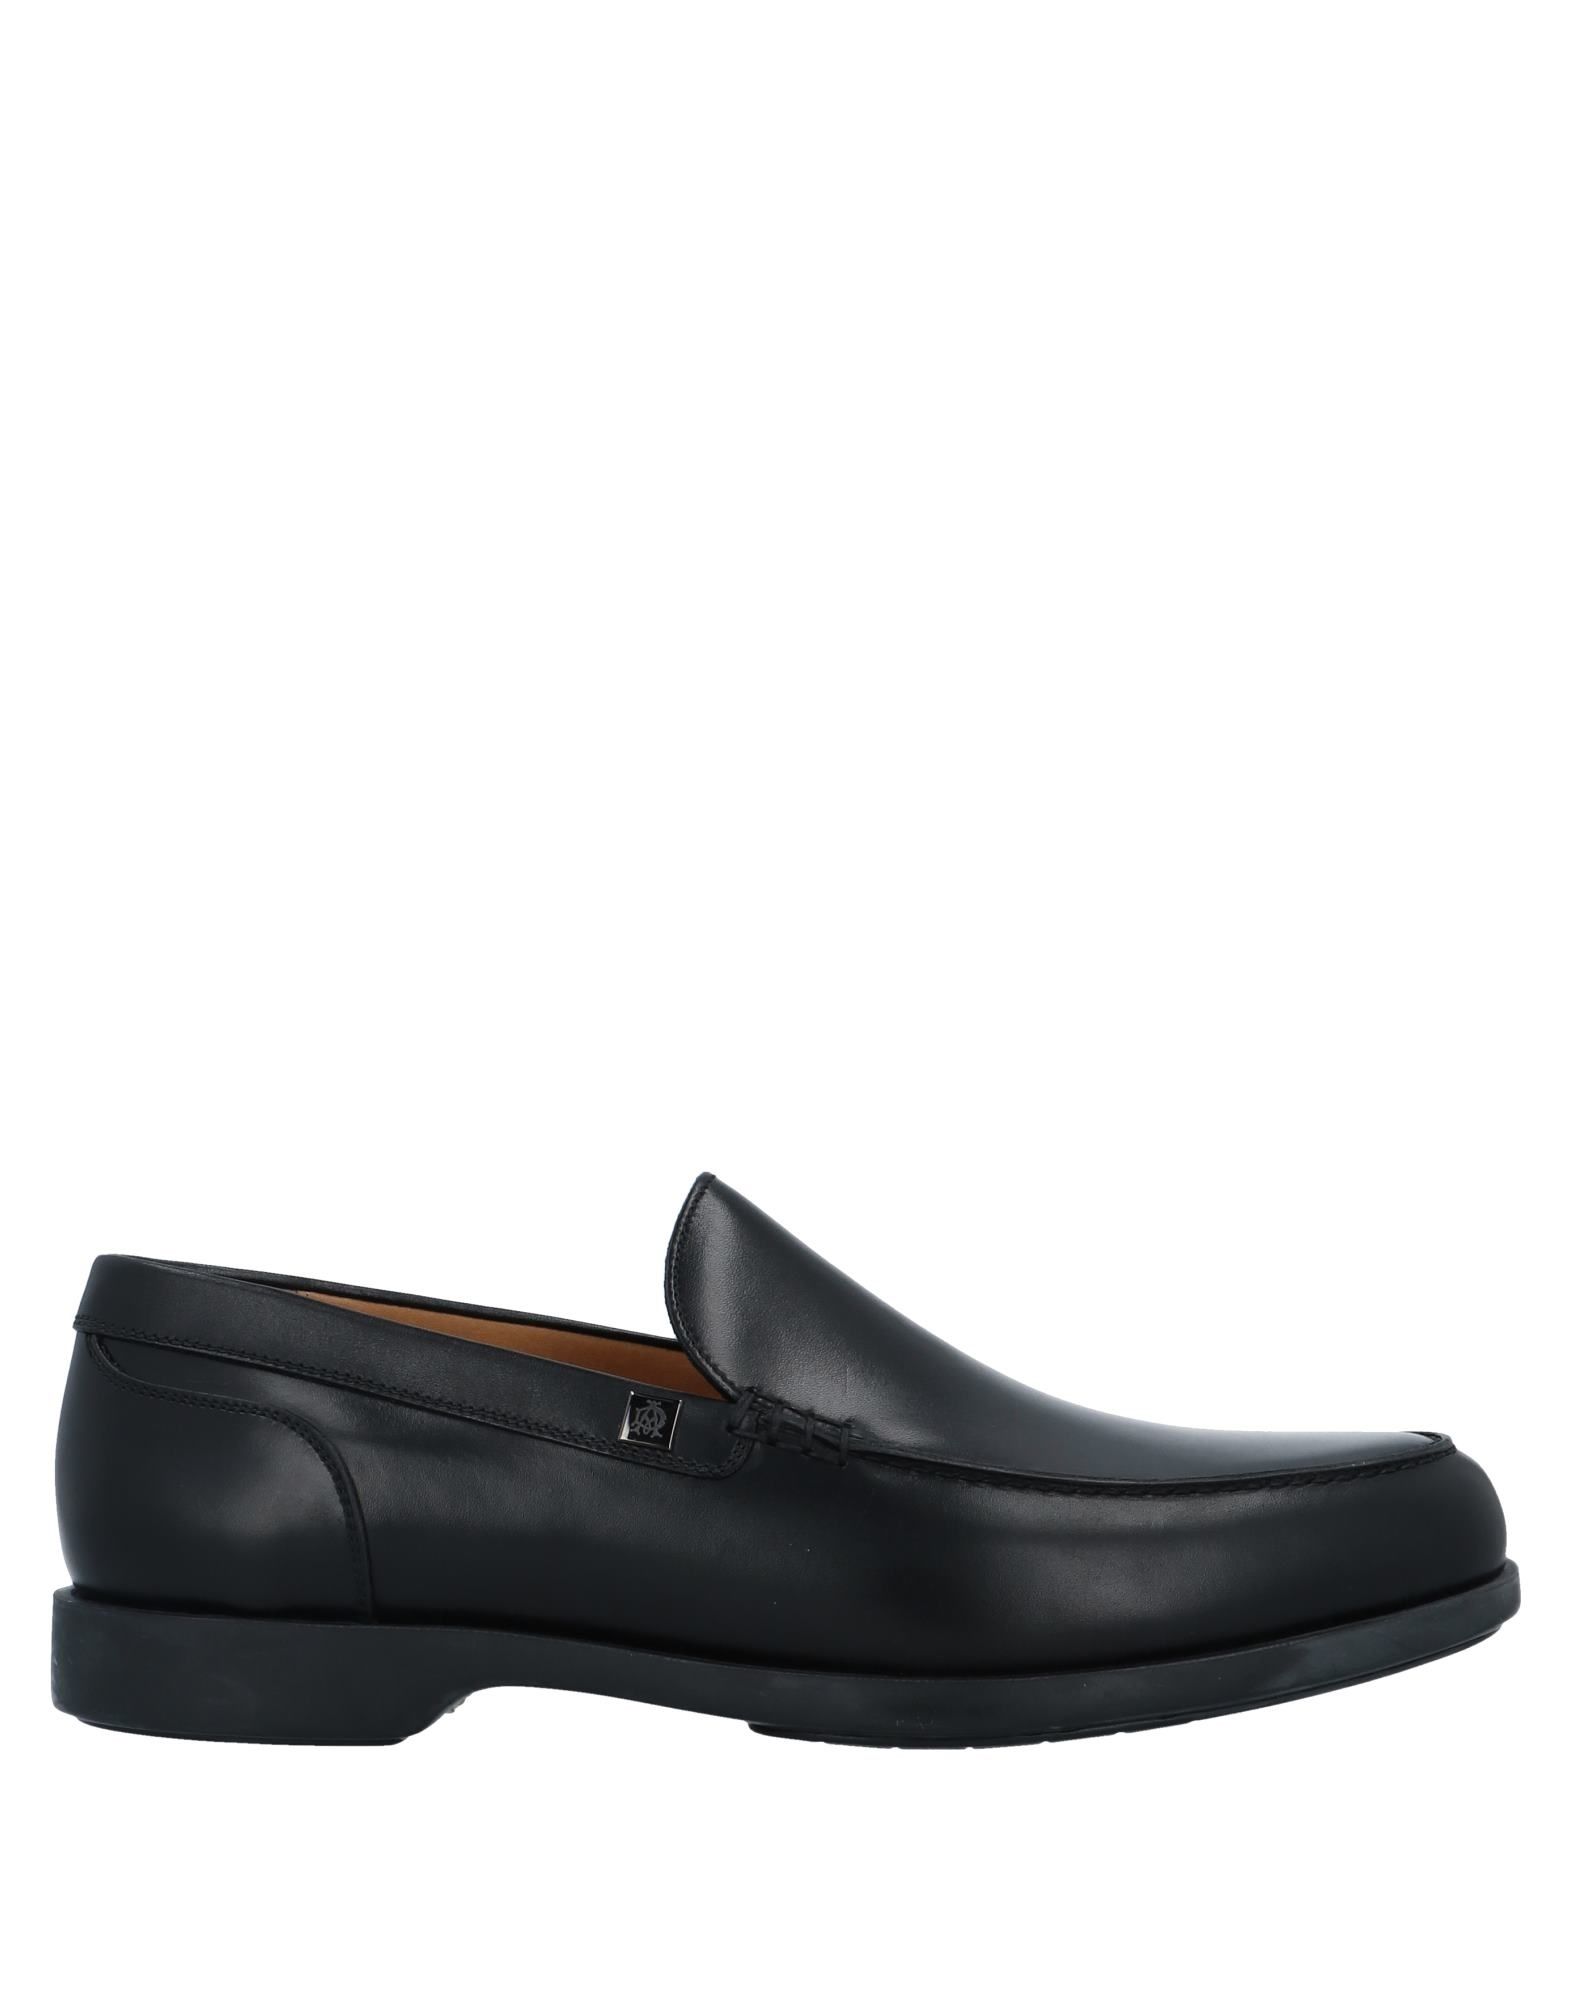 DUNHILL Loafers,11688735AG 3